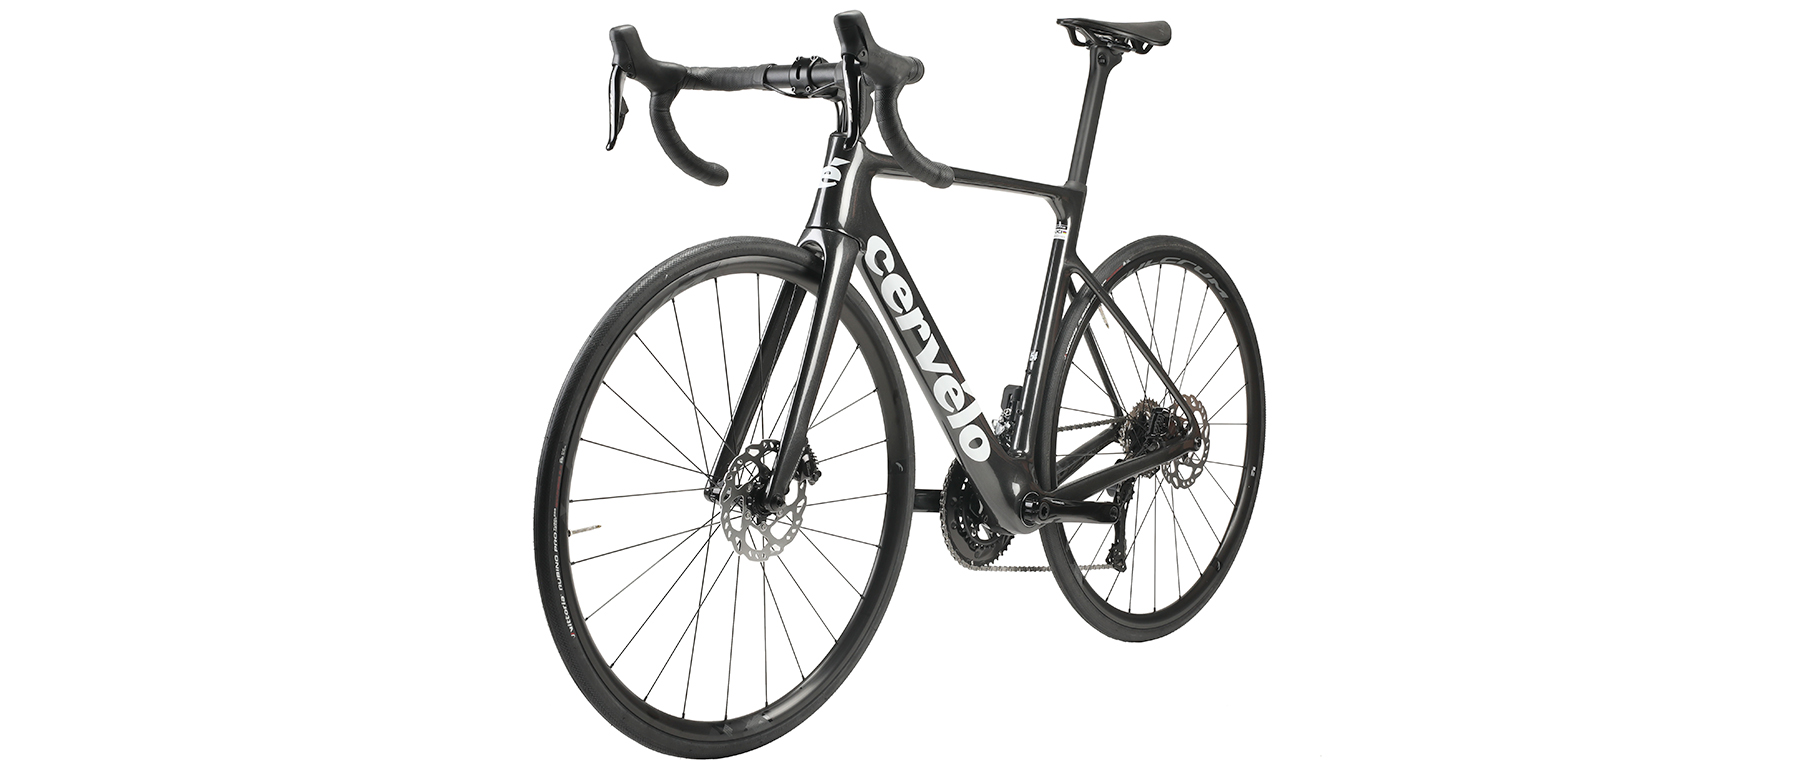 Cervelo Soloist 105 R7170 Di2 Bicycle